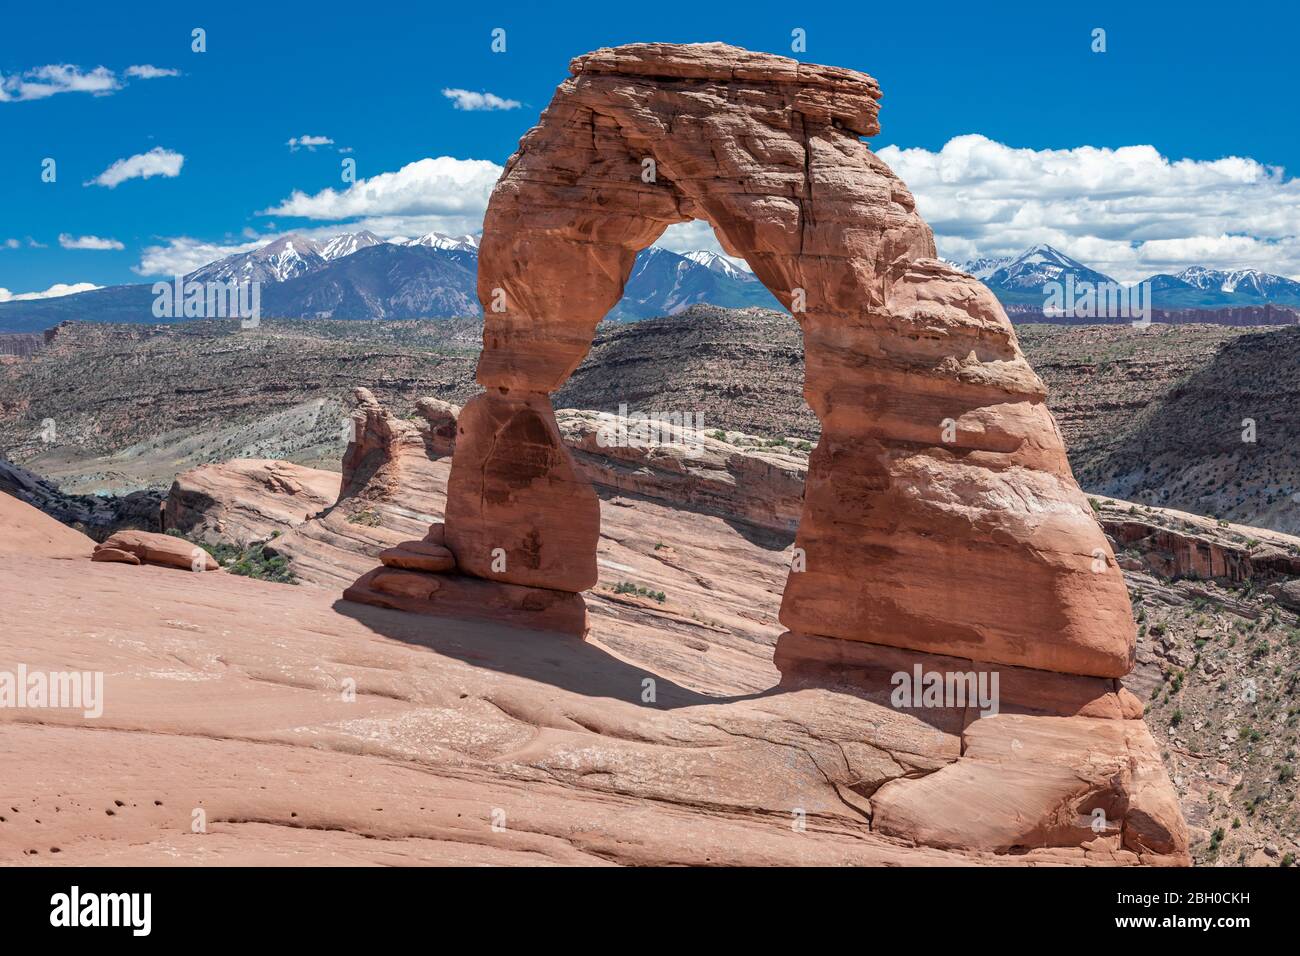 The famous Delicate Arch, Utah, in a sunny day against snow-capped mountains Stock Photo